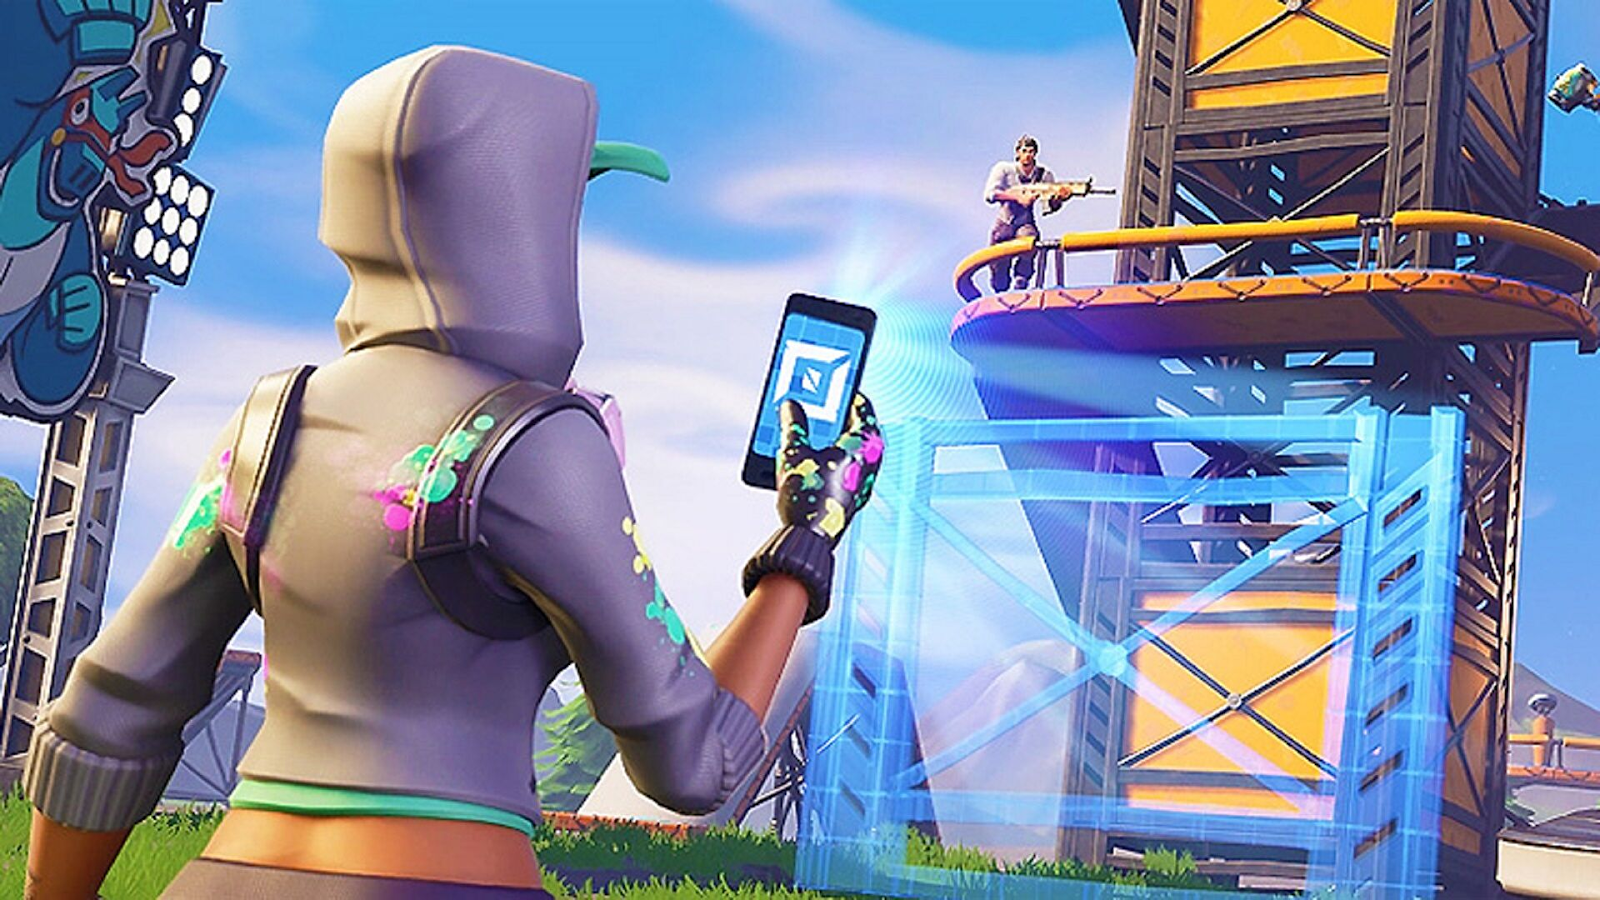 Learn How to Download And Install Fortnite on Mobile, Xbox, and PC